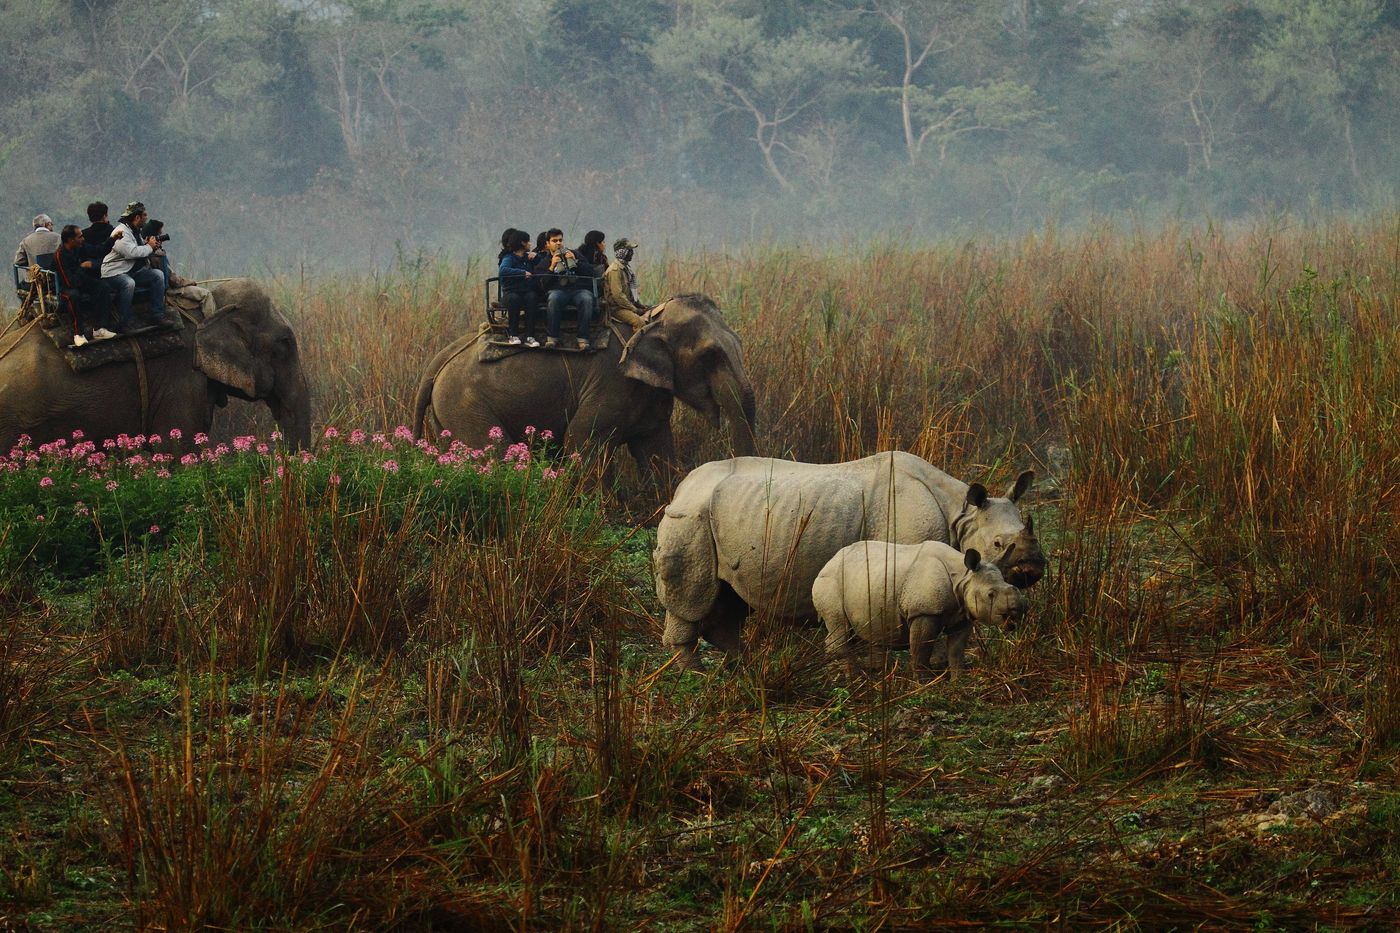 Tourists watching a mother one-horned rhino and her calf from the backs of elephants in Kaziranga National Park, Assam, North-east India